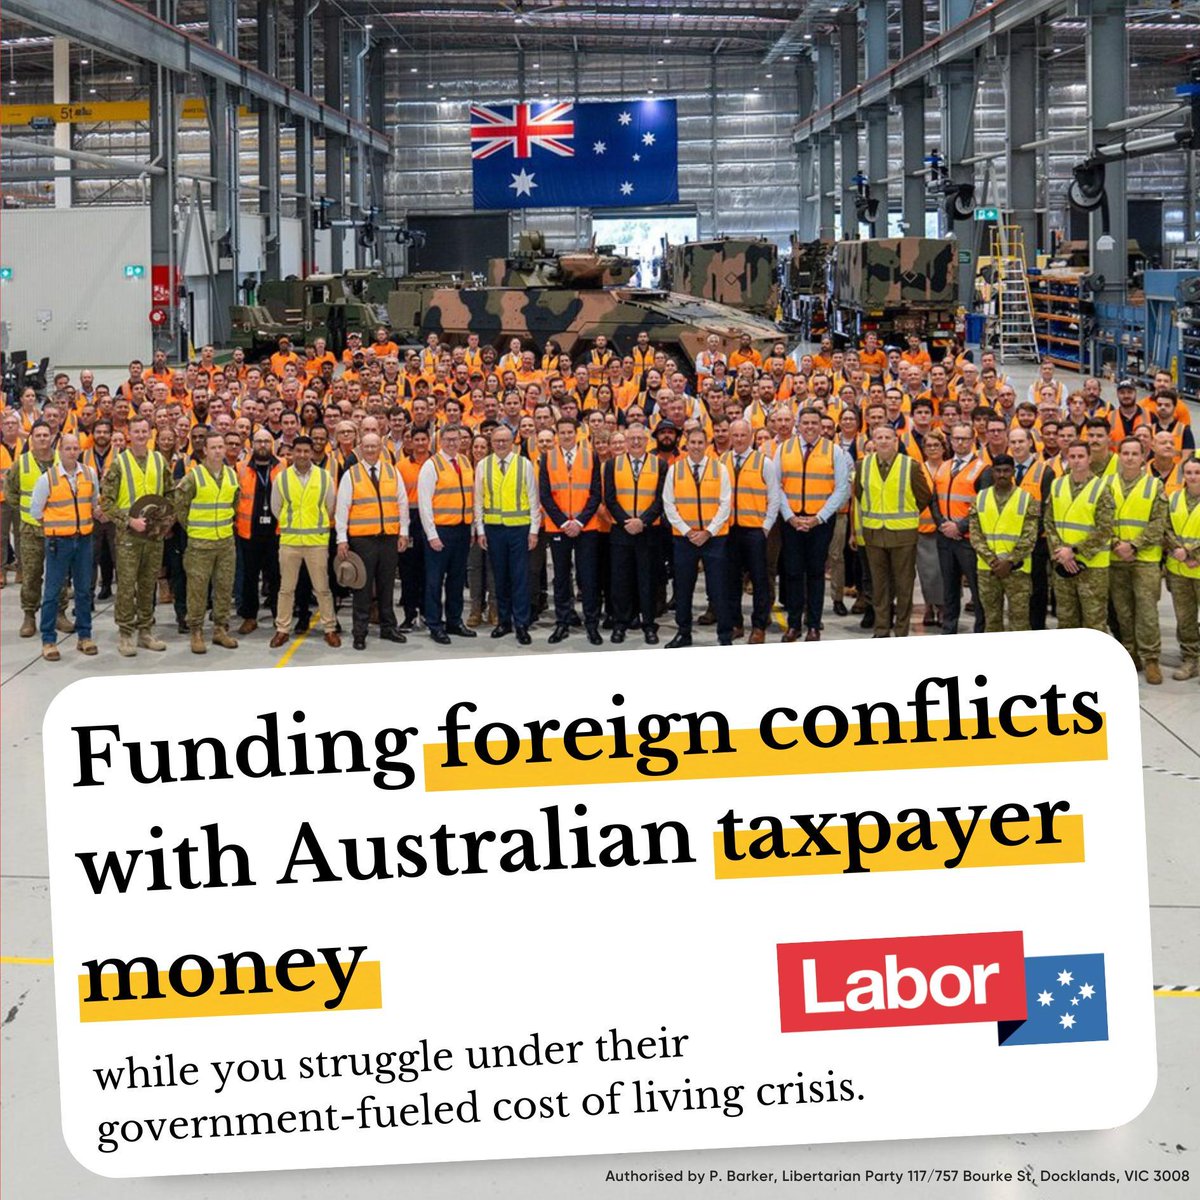 While you struggle with a cost of living crisis created by the legacy of the Morrison Liberal government and the Albanese Labor government, your taxes are subsidising profitable multinationals to fuel overseas conflicts. #votelibertarian to stop your taxes funding foreign wars!